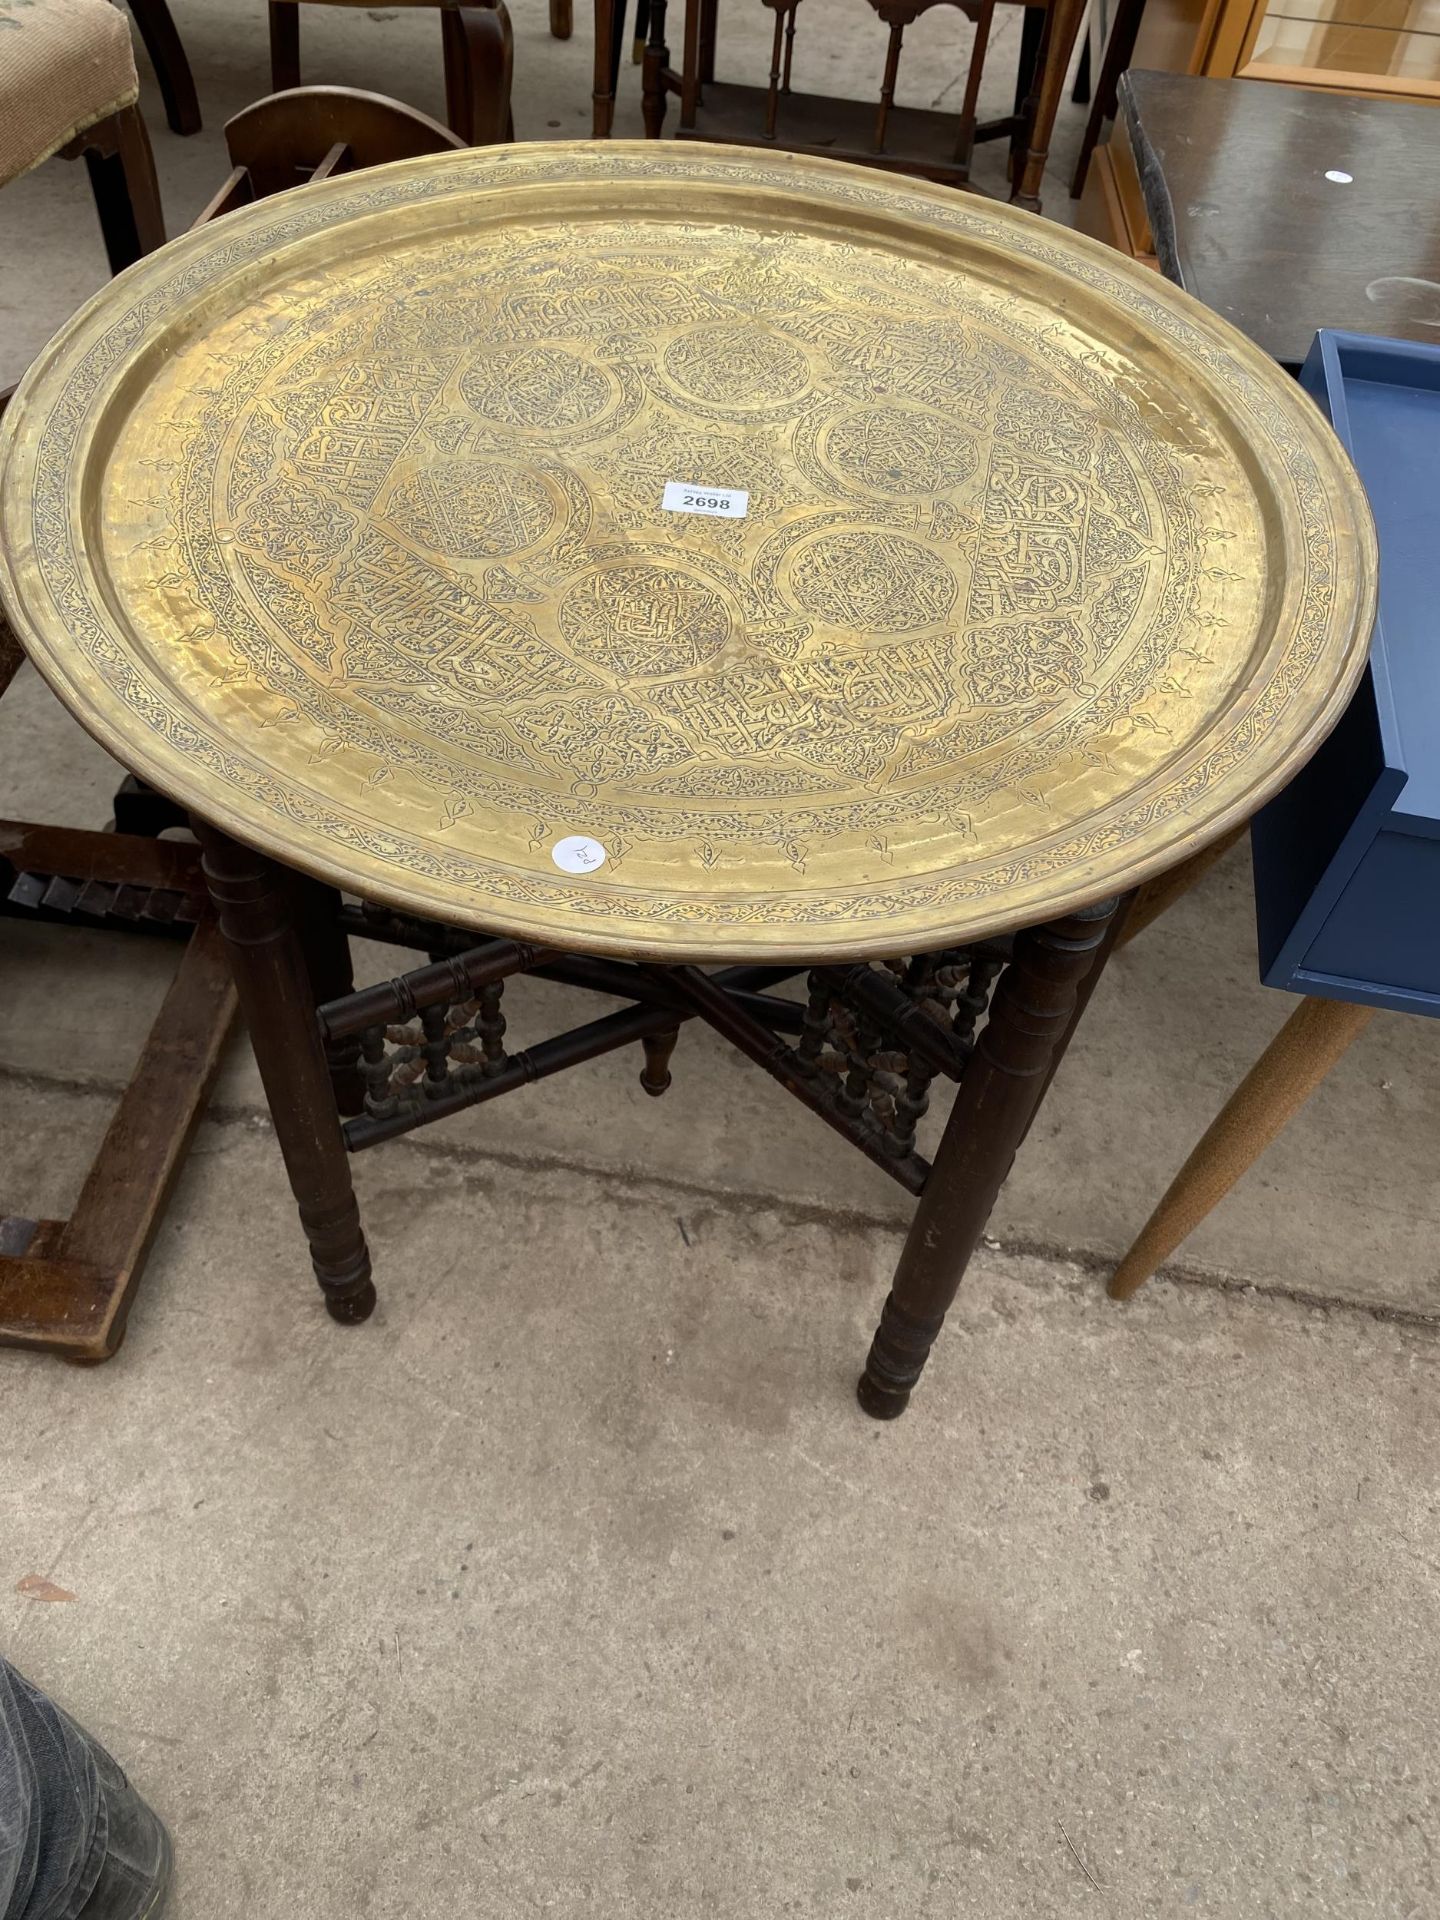 A MIDDLE EASTERN BRASS TABLE, 23.5" DIAMETER, ON FOLDING BASE